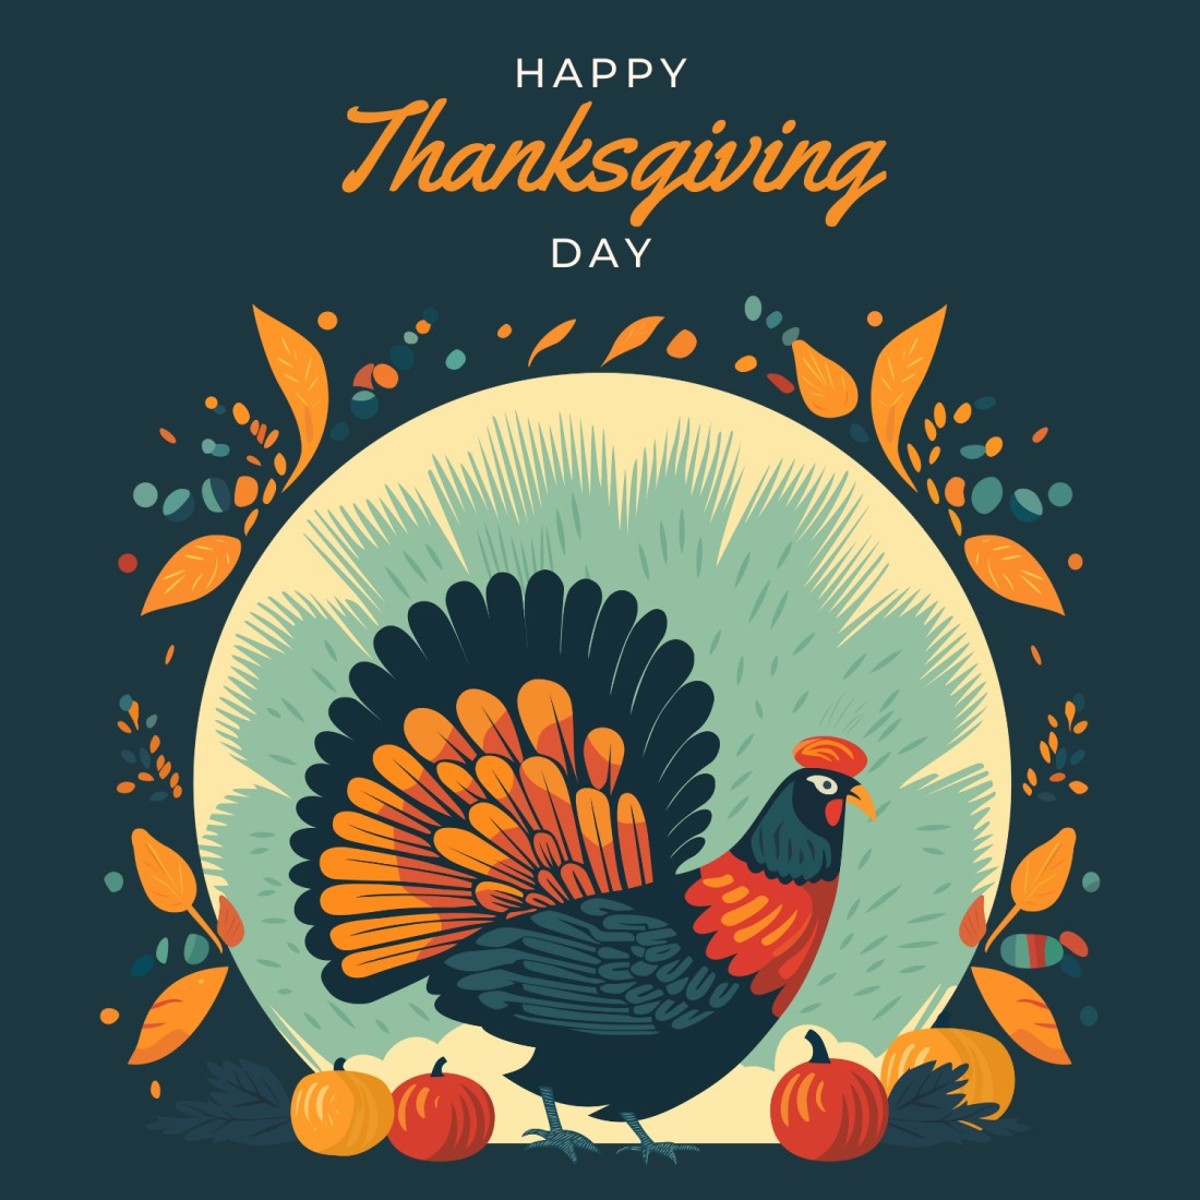 Only for $5 Best ThanksGiving Cards and wishes pinterest preview image.